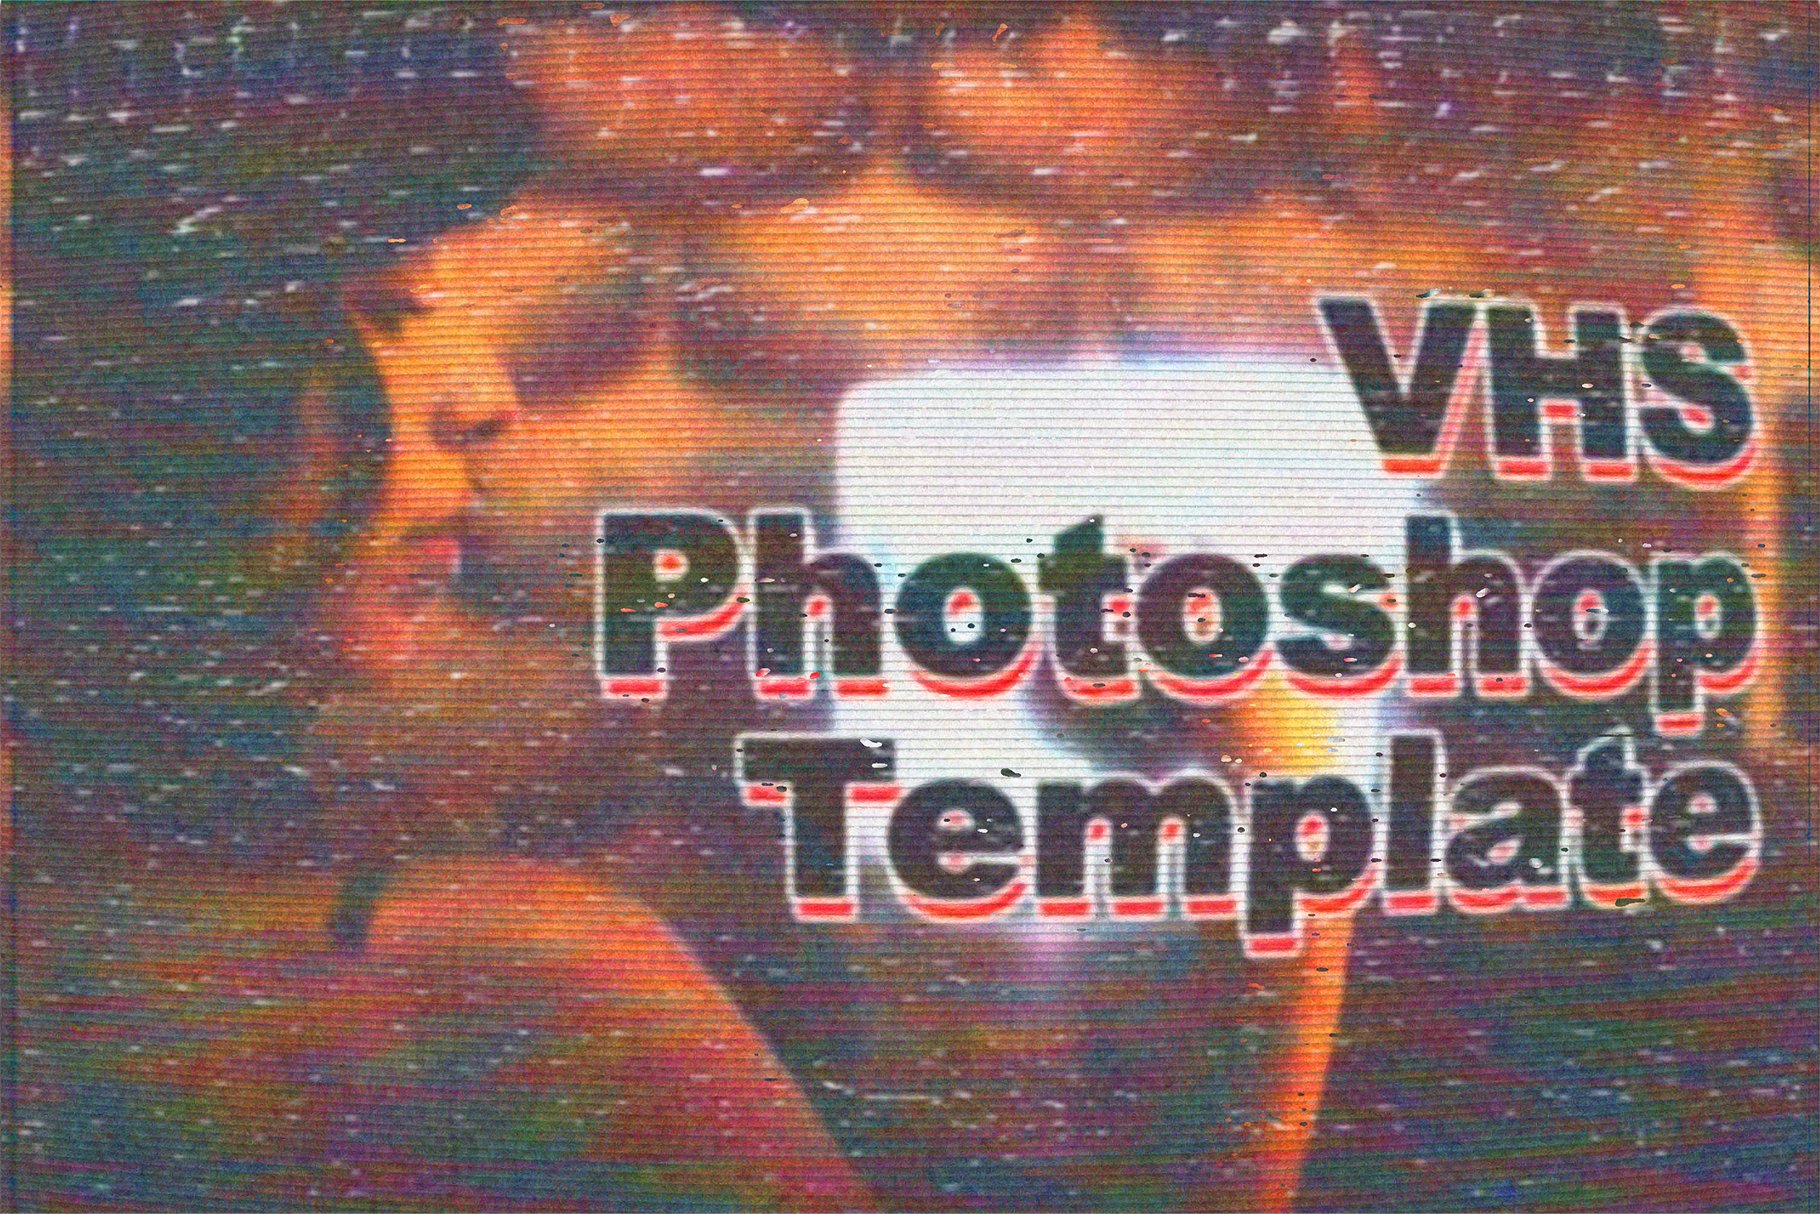 VHS Photoshop Templatecover image.